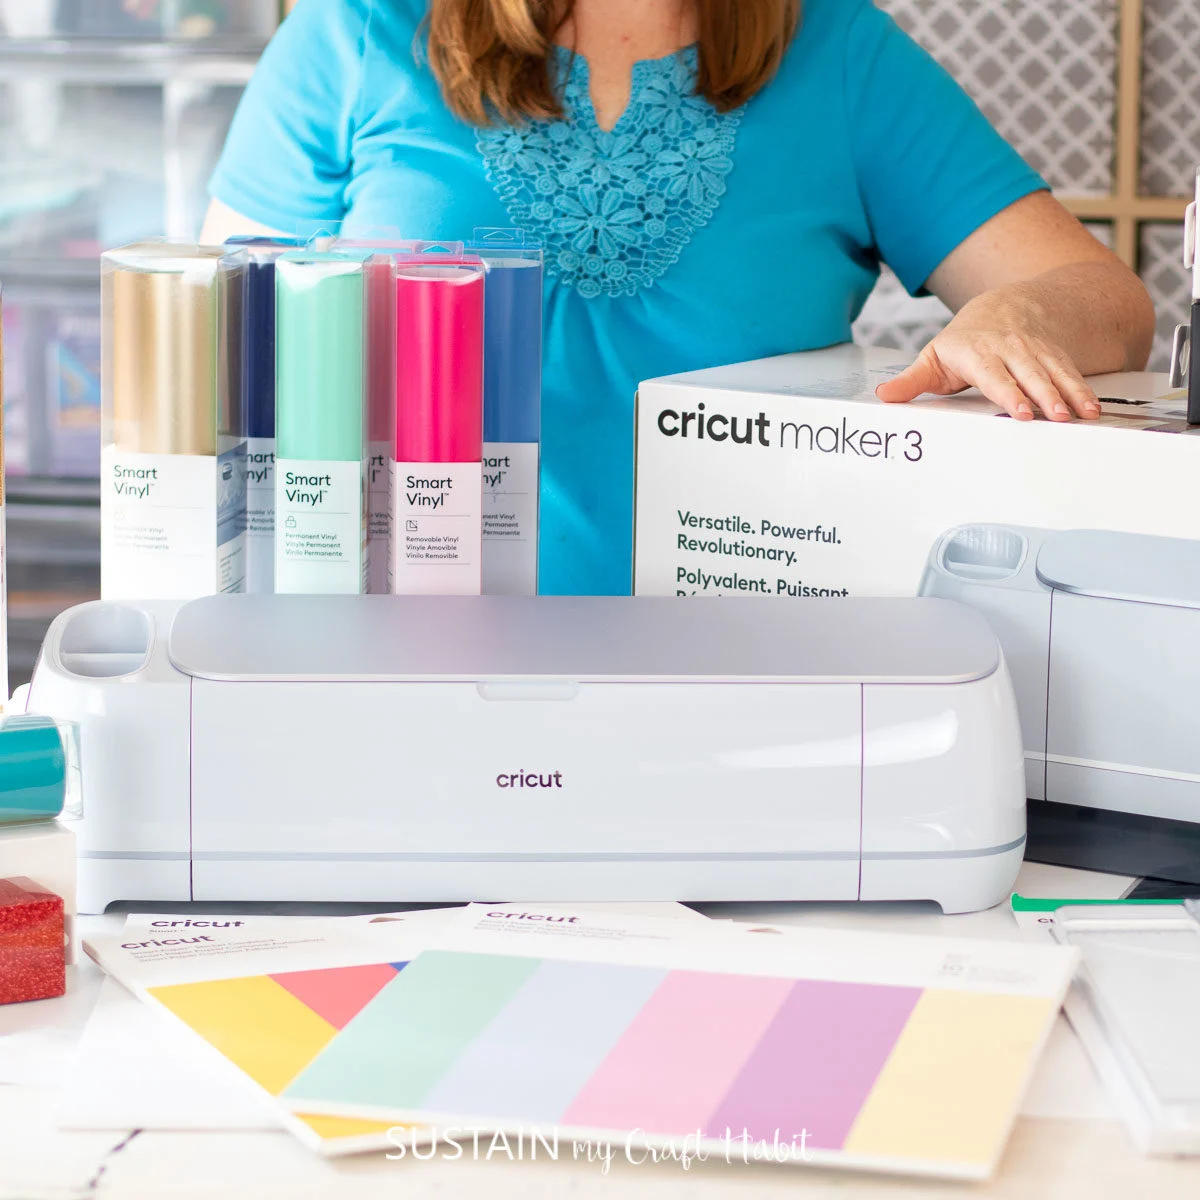 cricut maker 3 on a table in front of a woman